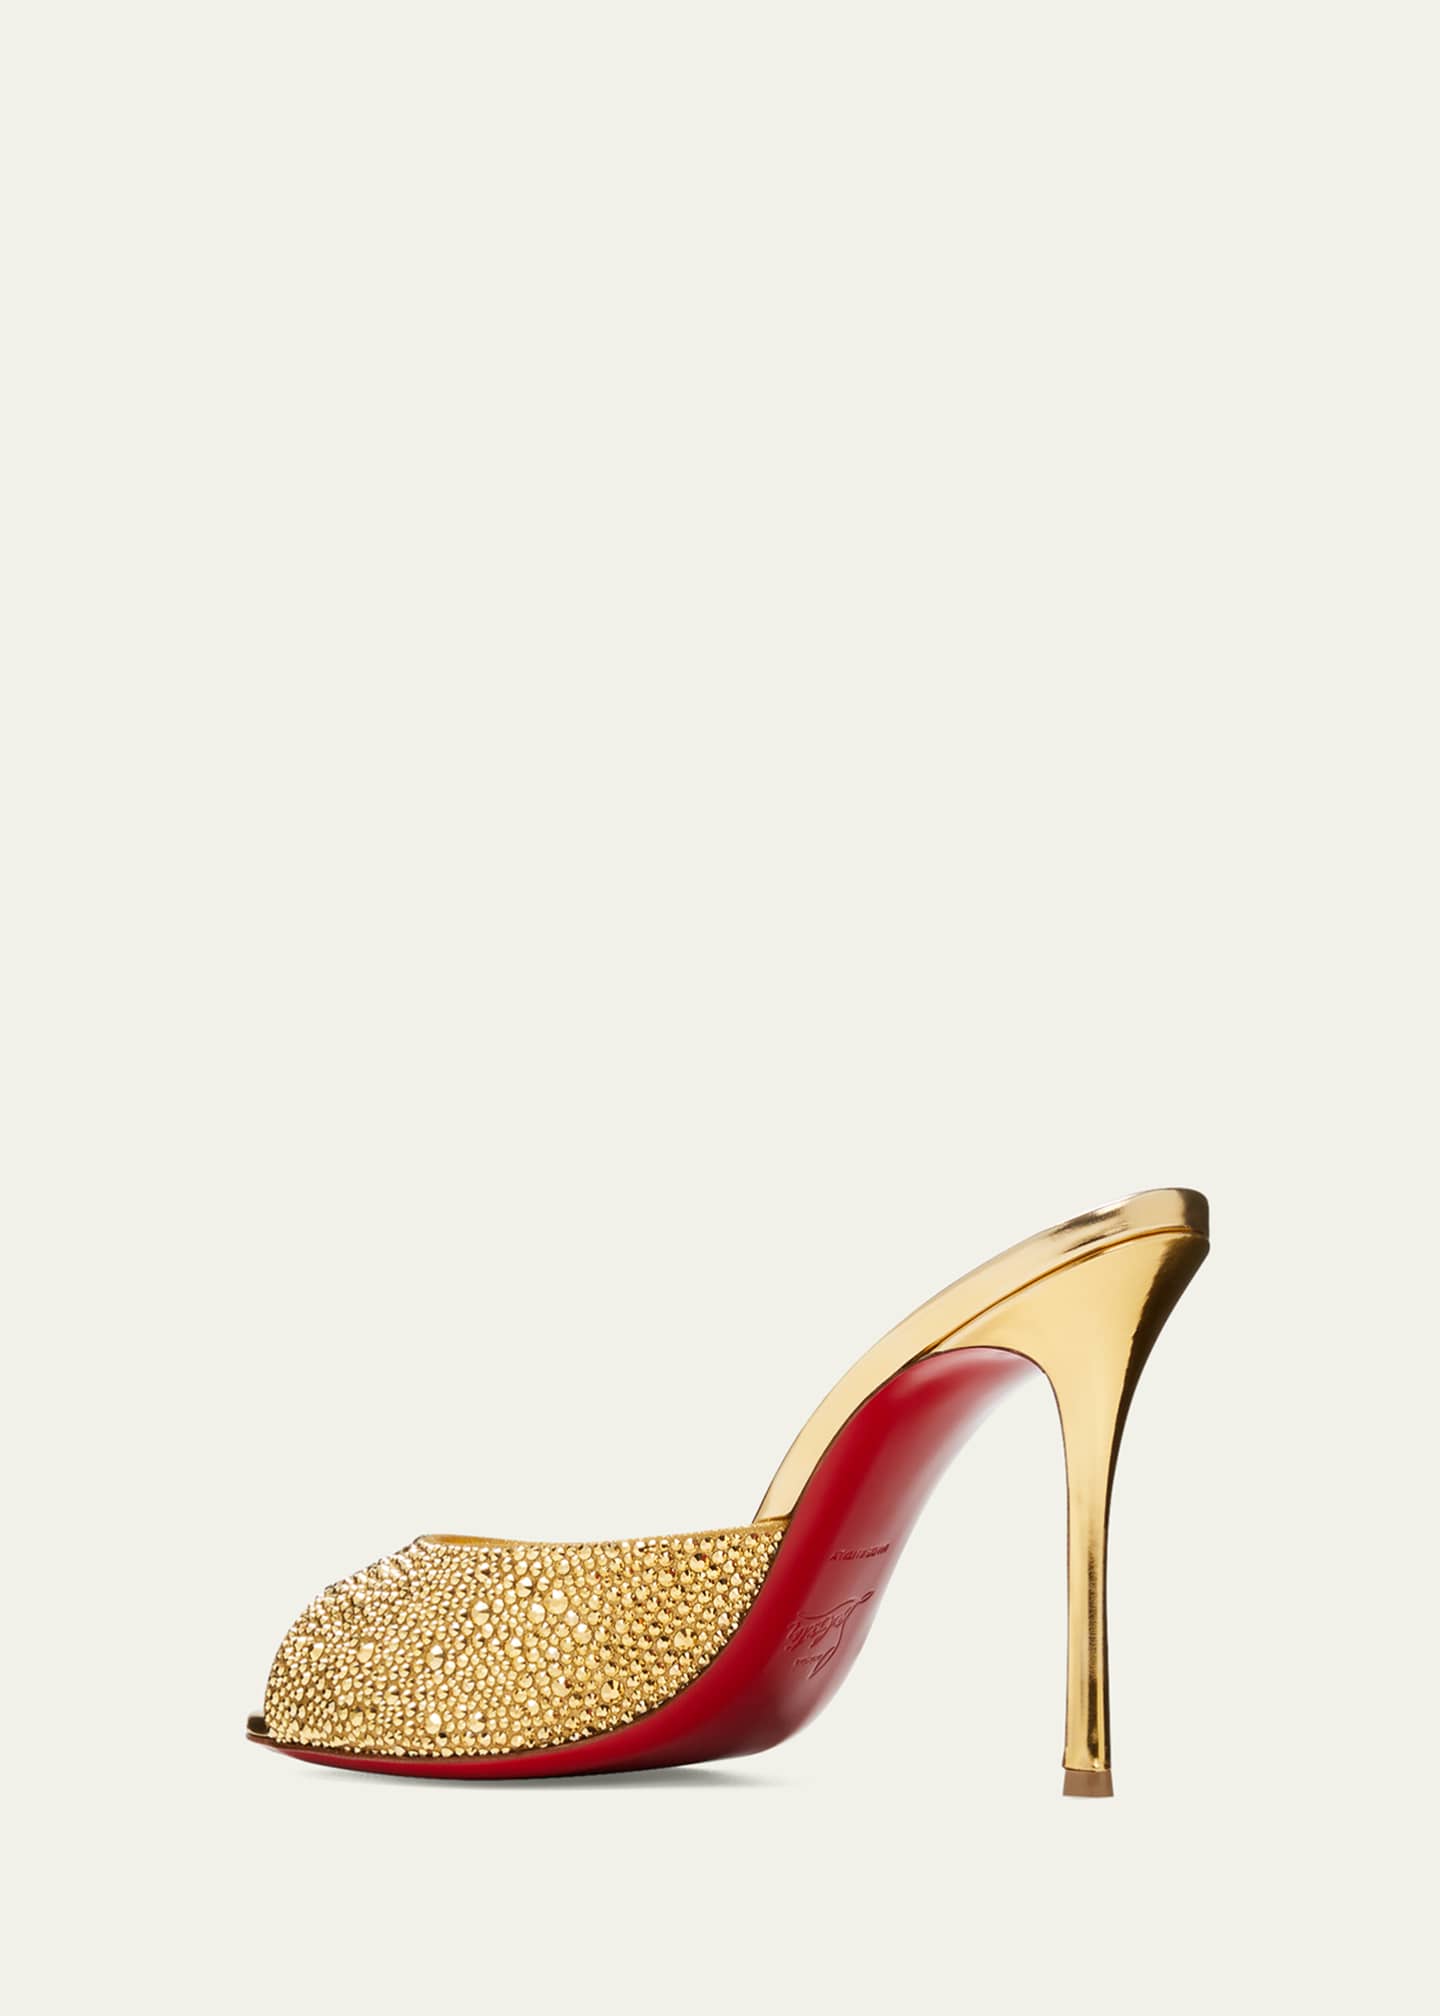 Christian Louboutin Me Dolly Strass Red Sole Slide Sandals